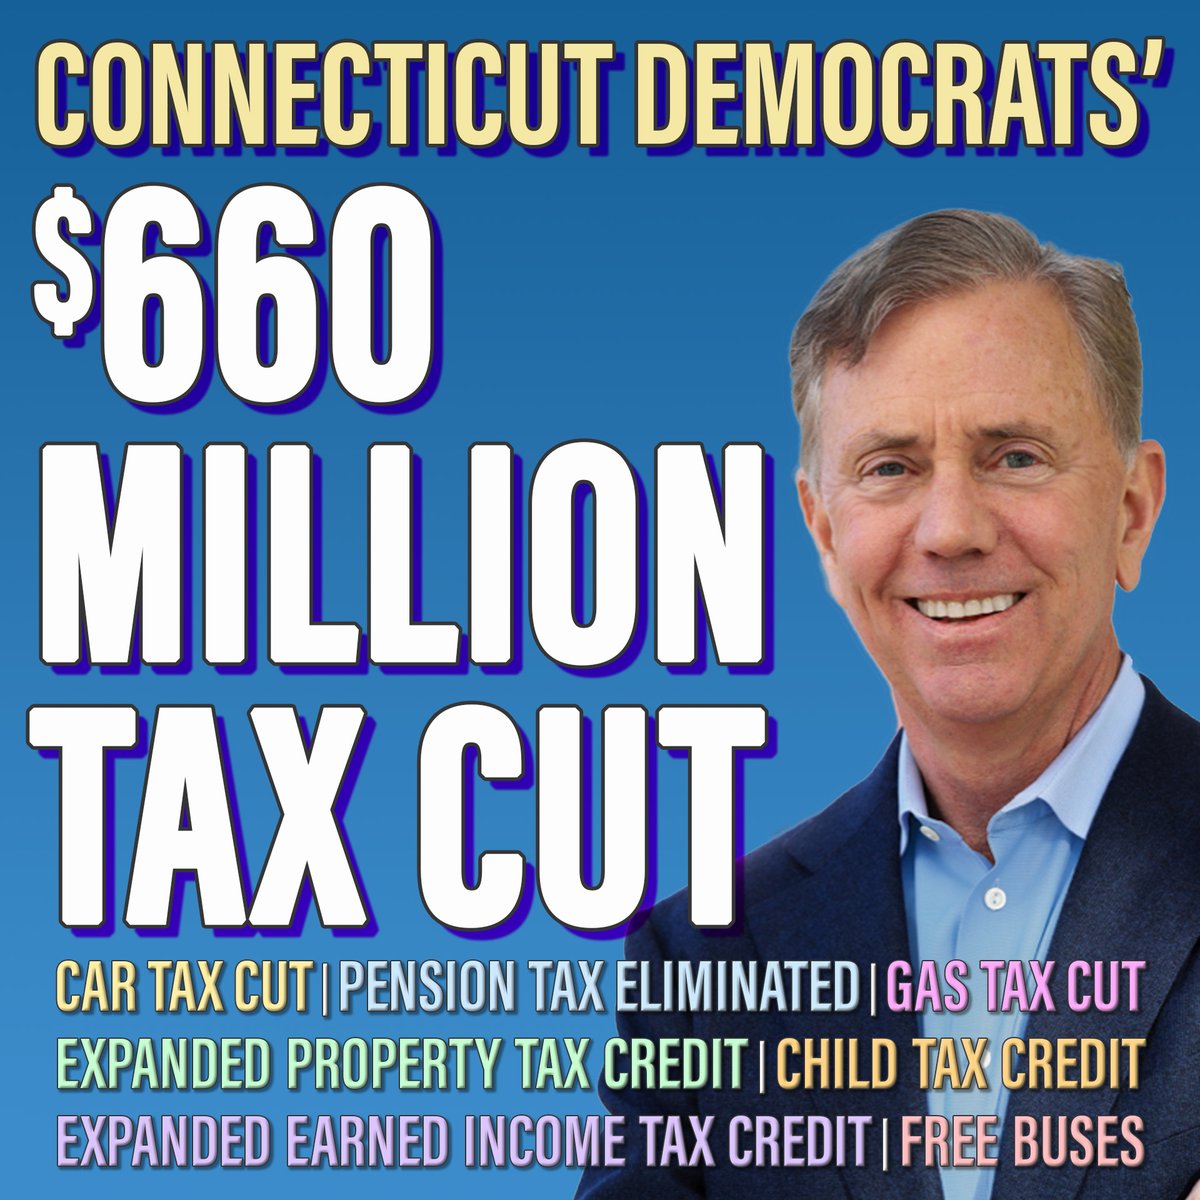 Connecticut Democrats enacted the largest tax cut in CT history. Nearly every Republican voted No. GOP said NO to gas tax cuts, to car tax caps, to property tax relief, to eliminating tax on pensions for seniors. Only Democrats, with Gov. @NedLamont, have been reducing costs.